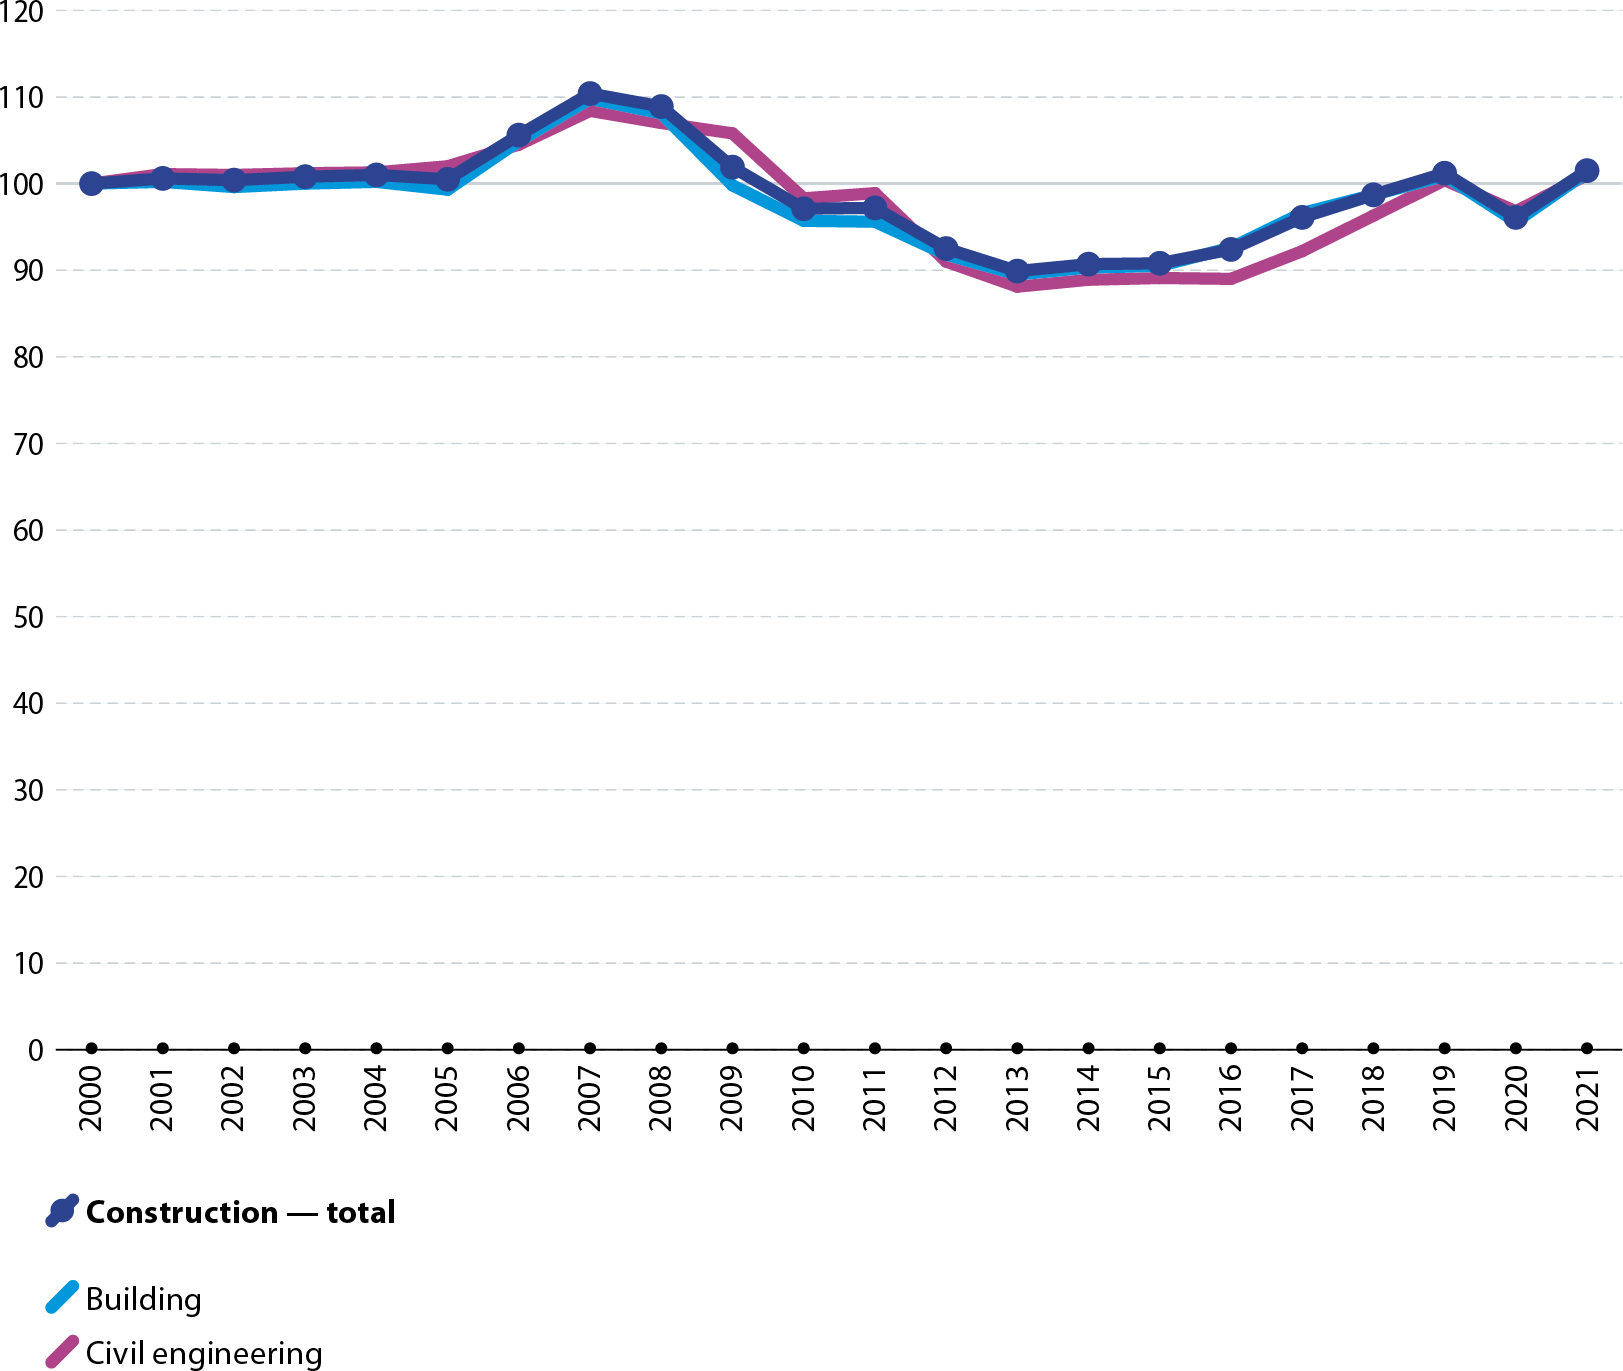 Production index. Data for the EU. Annual data for 2000 to 2021. Construction total, building and civil engineering. Line graph. In 2021, the construction production index was 2% higher than it had been in 2000.